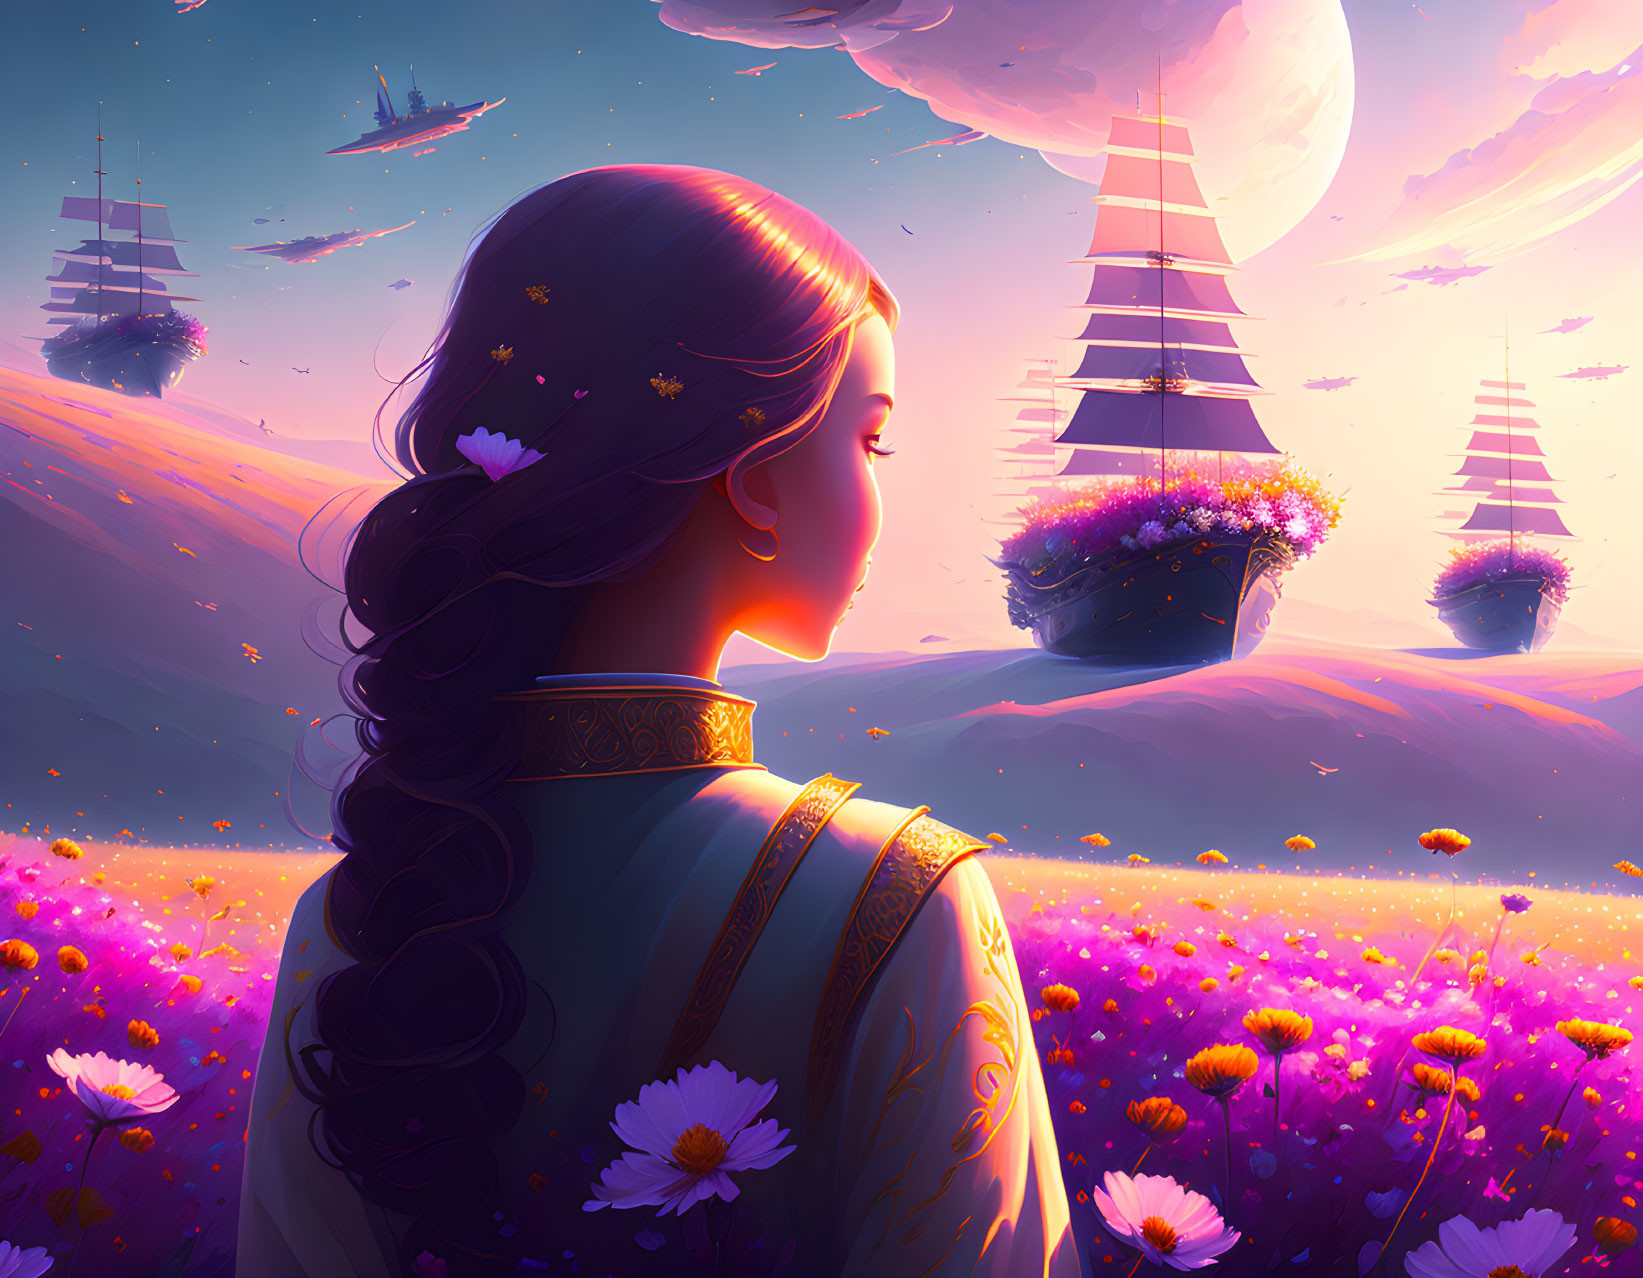 Woman admires floating ships in vibrant sunset over purple flower field